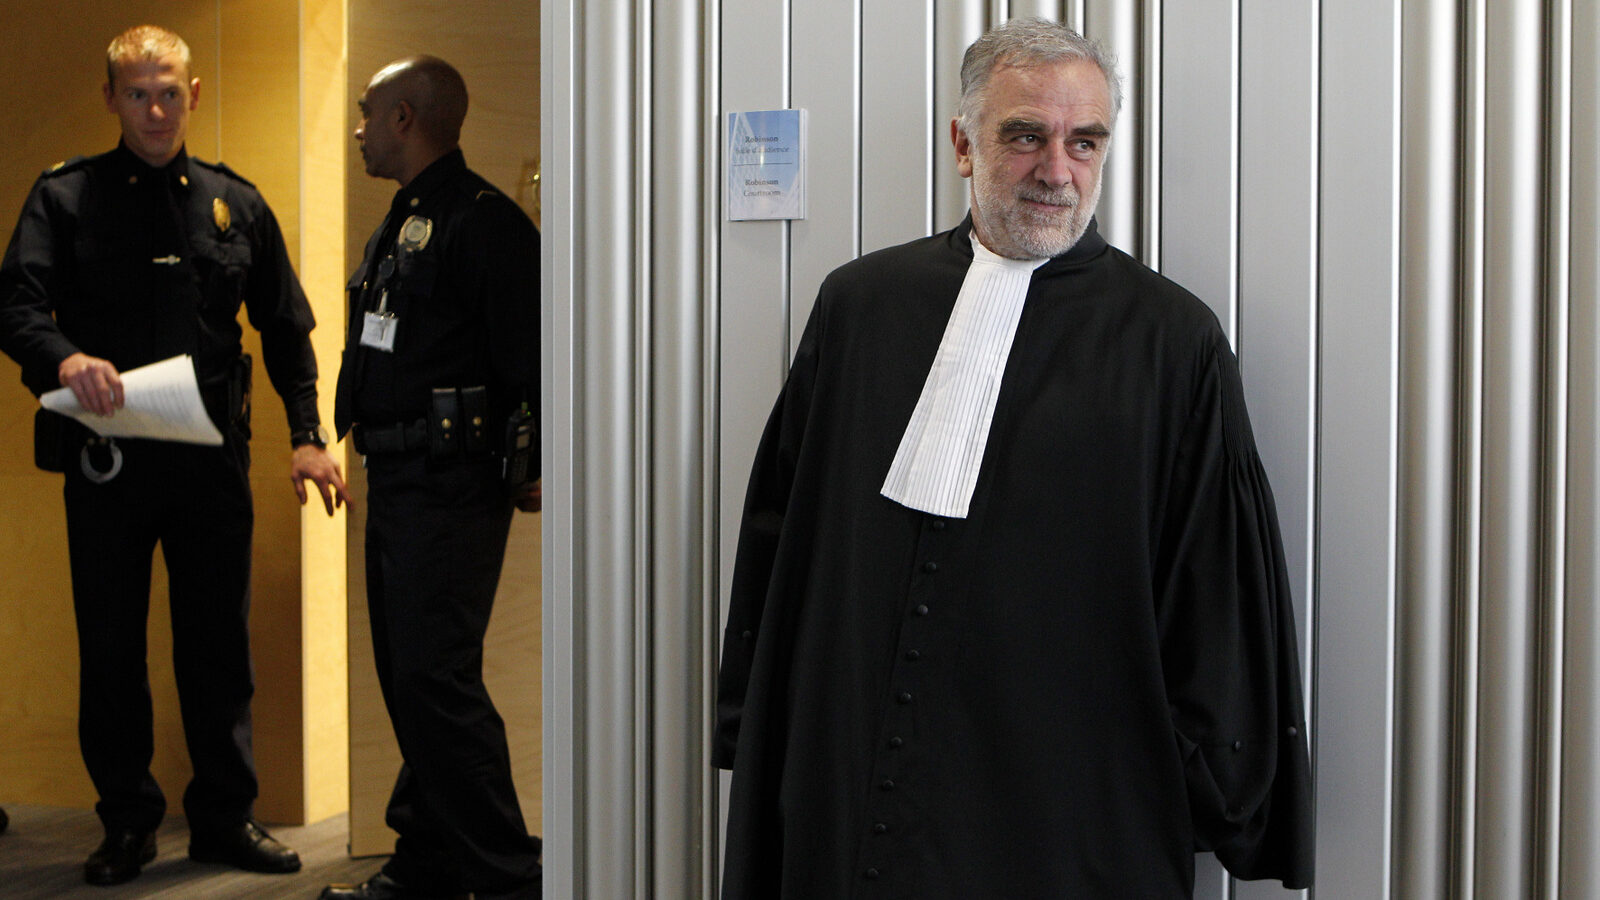 Luis Moreno-Ocampo leaves after a swearing-in ceremony at The International Criminal Court (ICC) in The Hague, Netherlands, Friday, June 15, 2012. (AP/Bas Czerwinski)